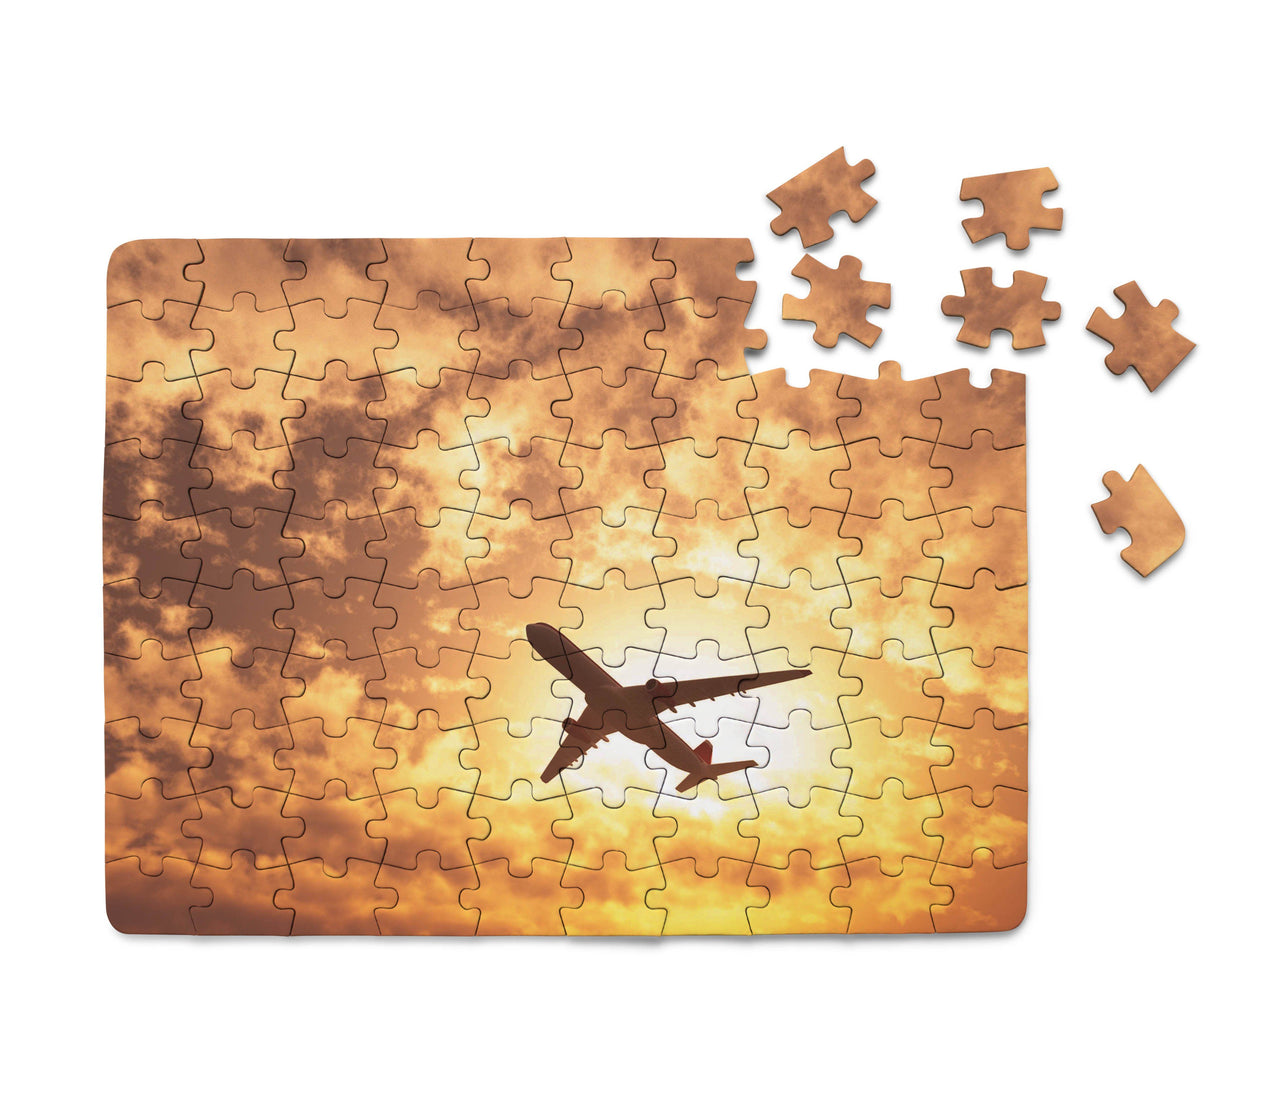 Plane Passing By Printed Puzzles Aviation Shop 